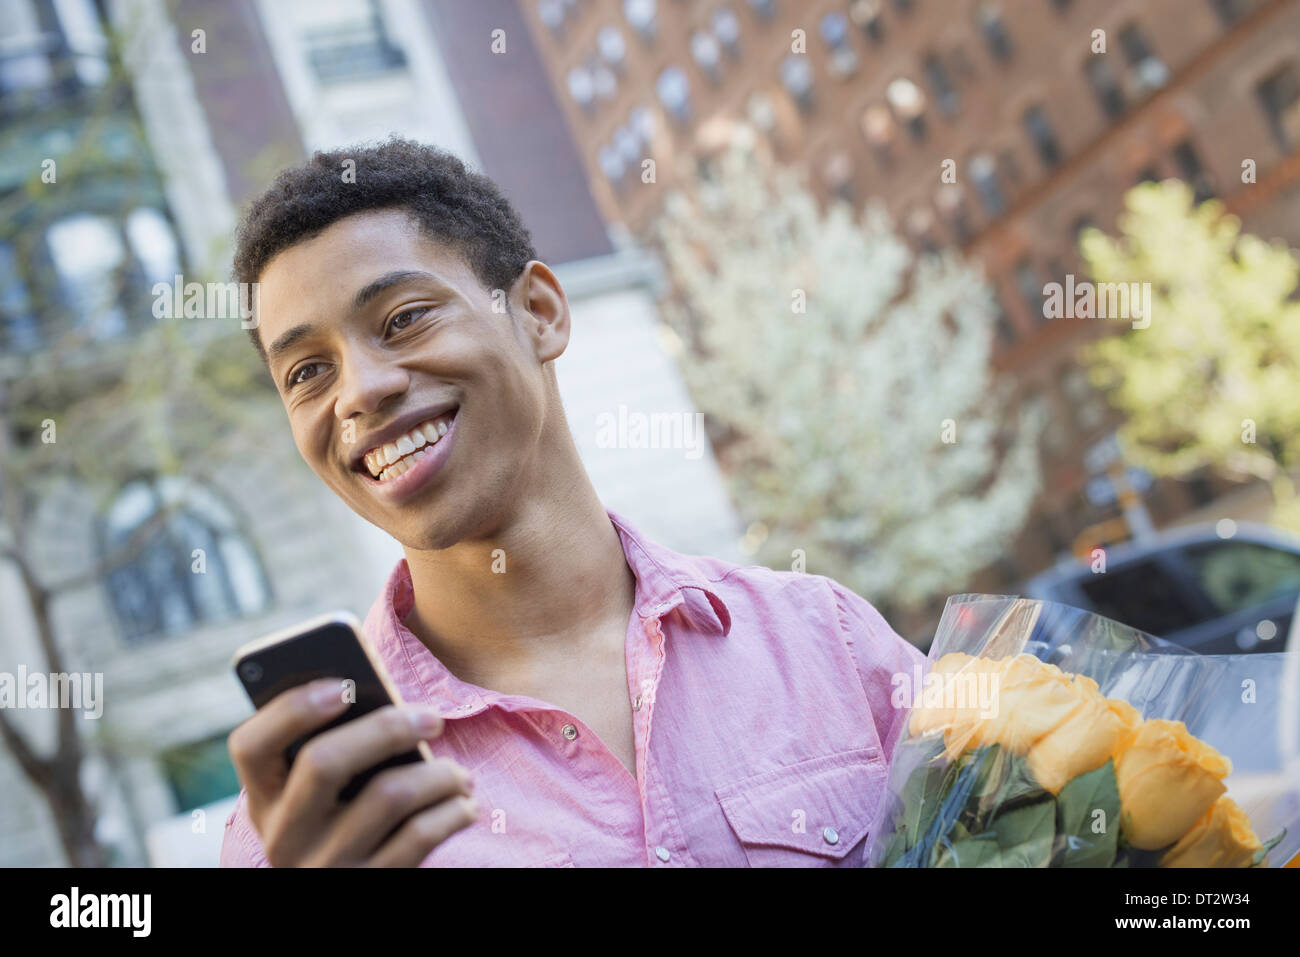 Urban Lifestyle A young man with short black hair wearing a pink casual shirt Holding a smart phone Stock Photo